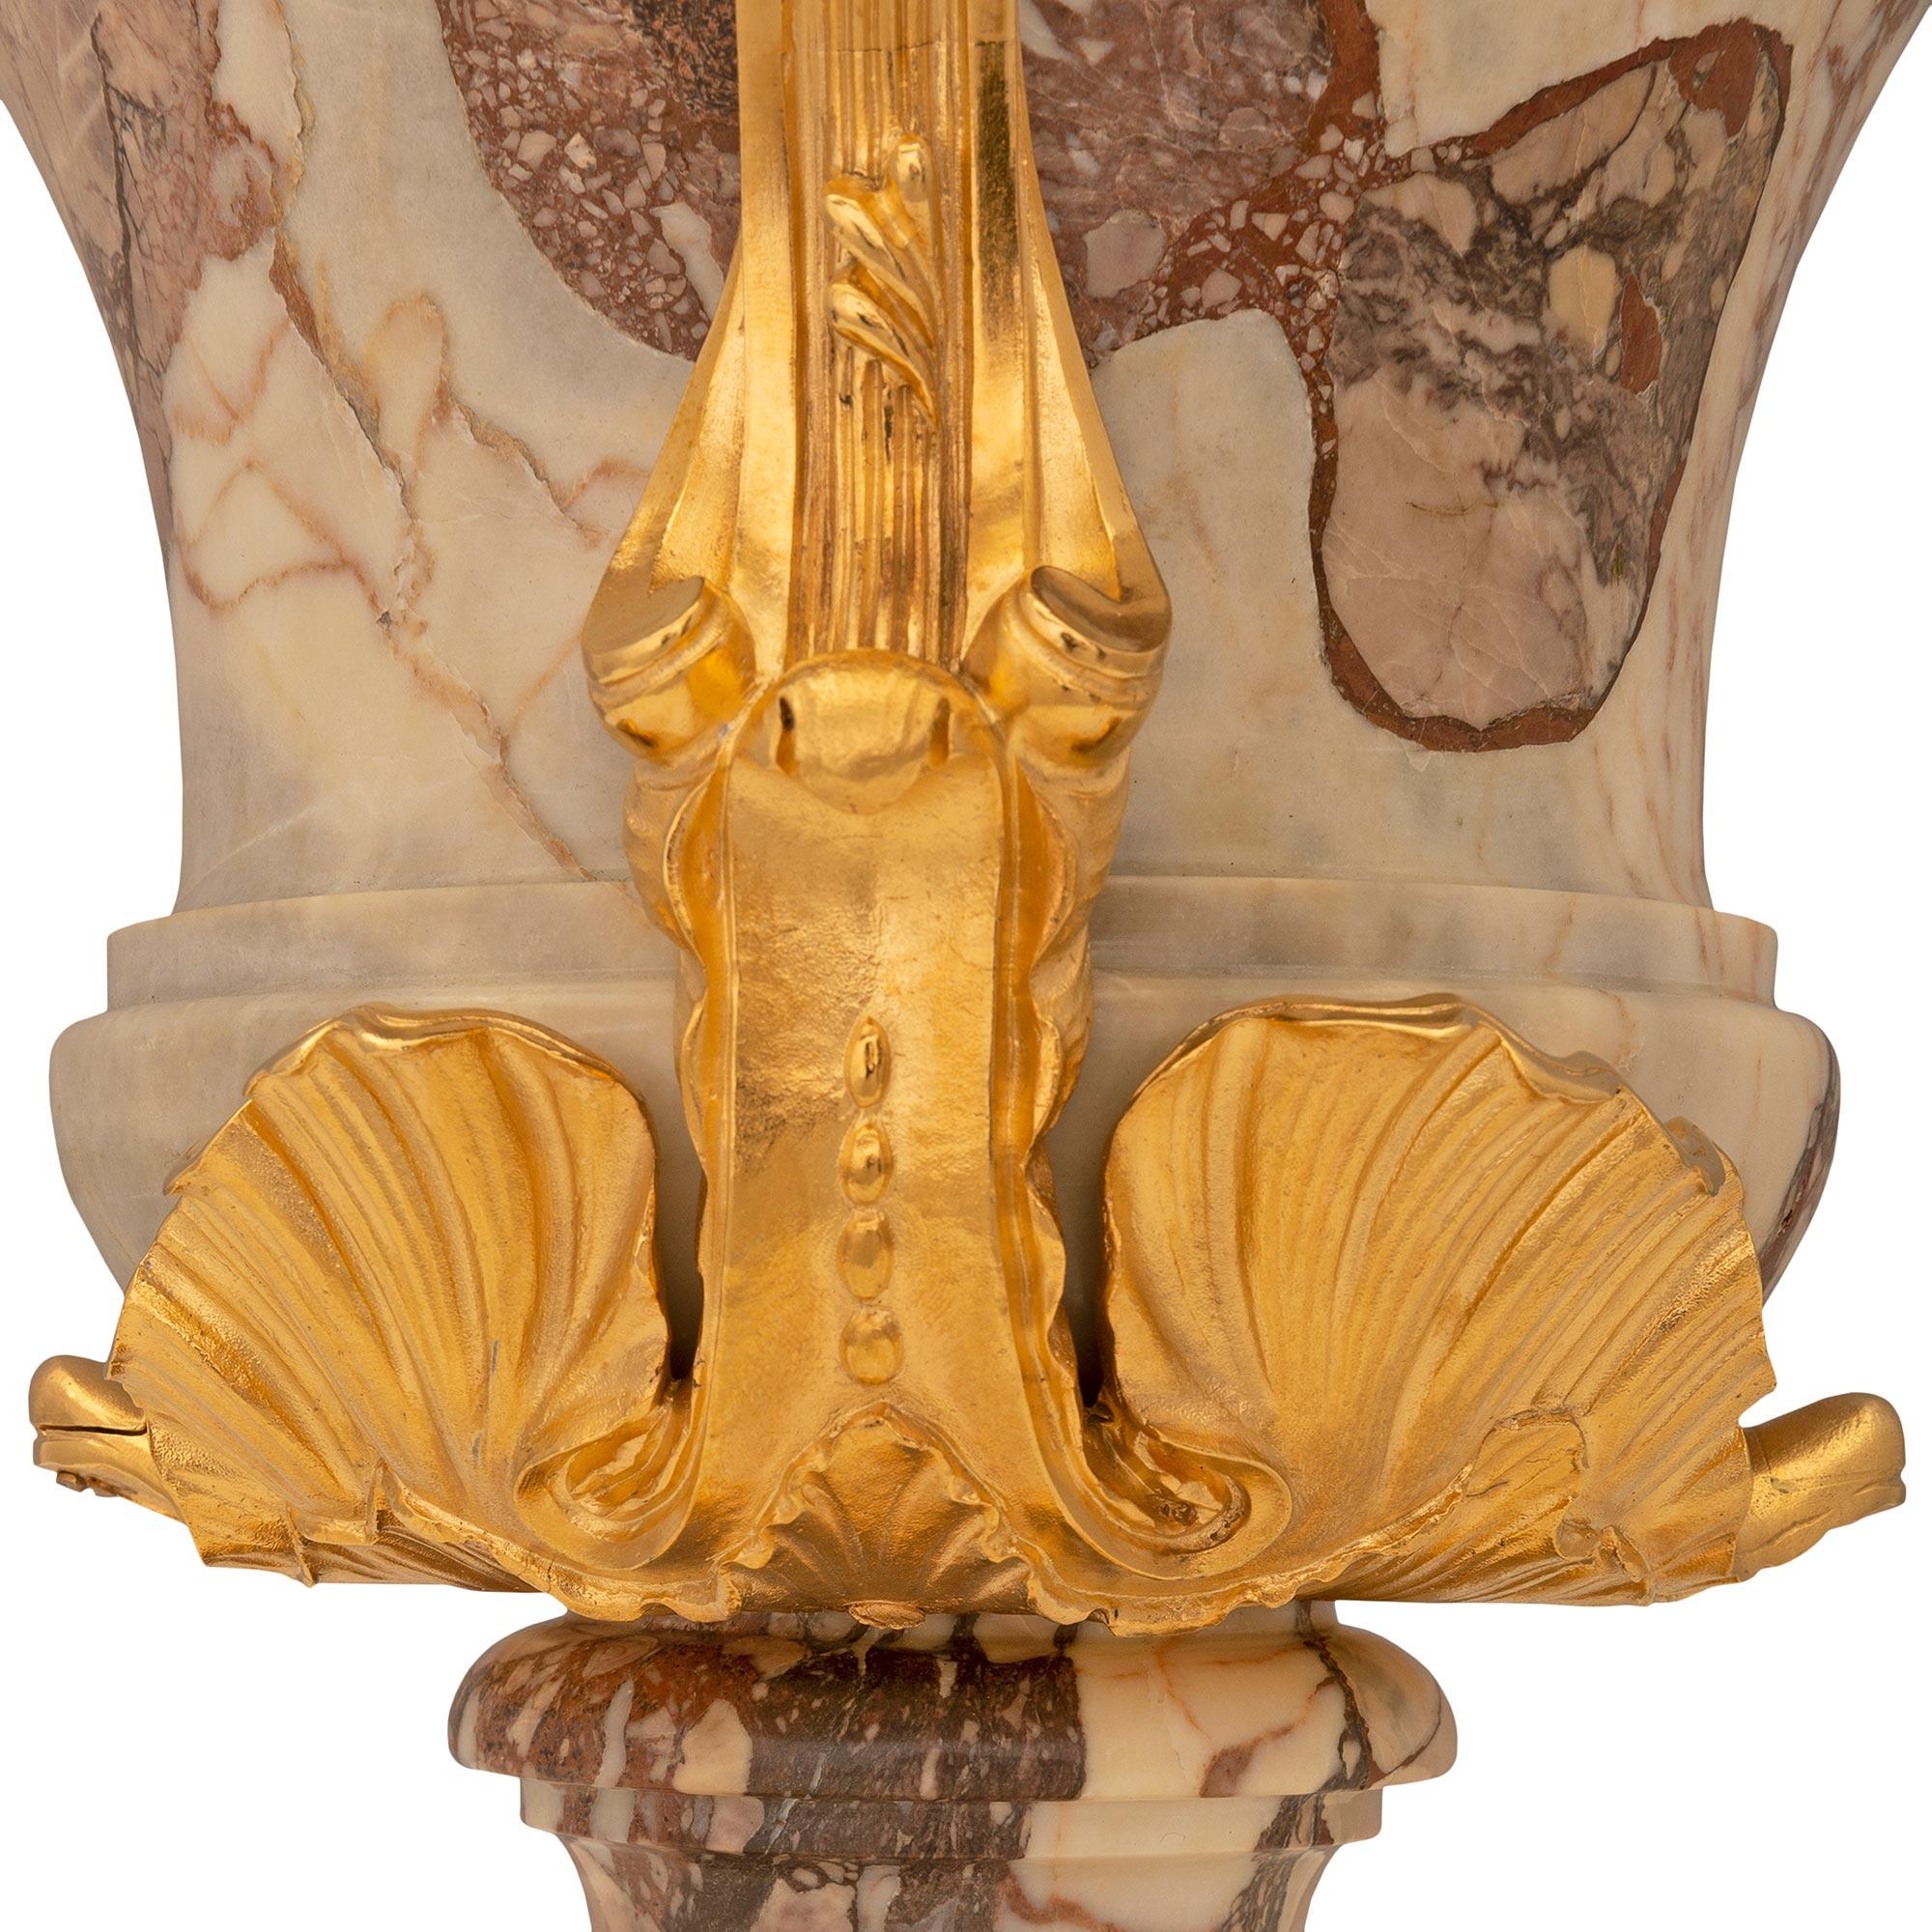 French 19th Century Louis XV St. Brèche Violette Marble and Ormolu Urn For Sale 3